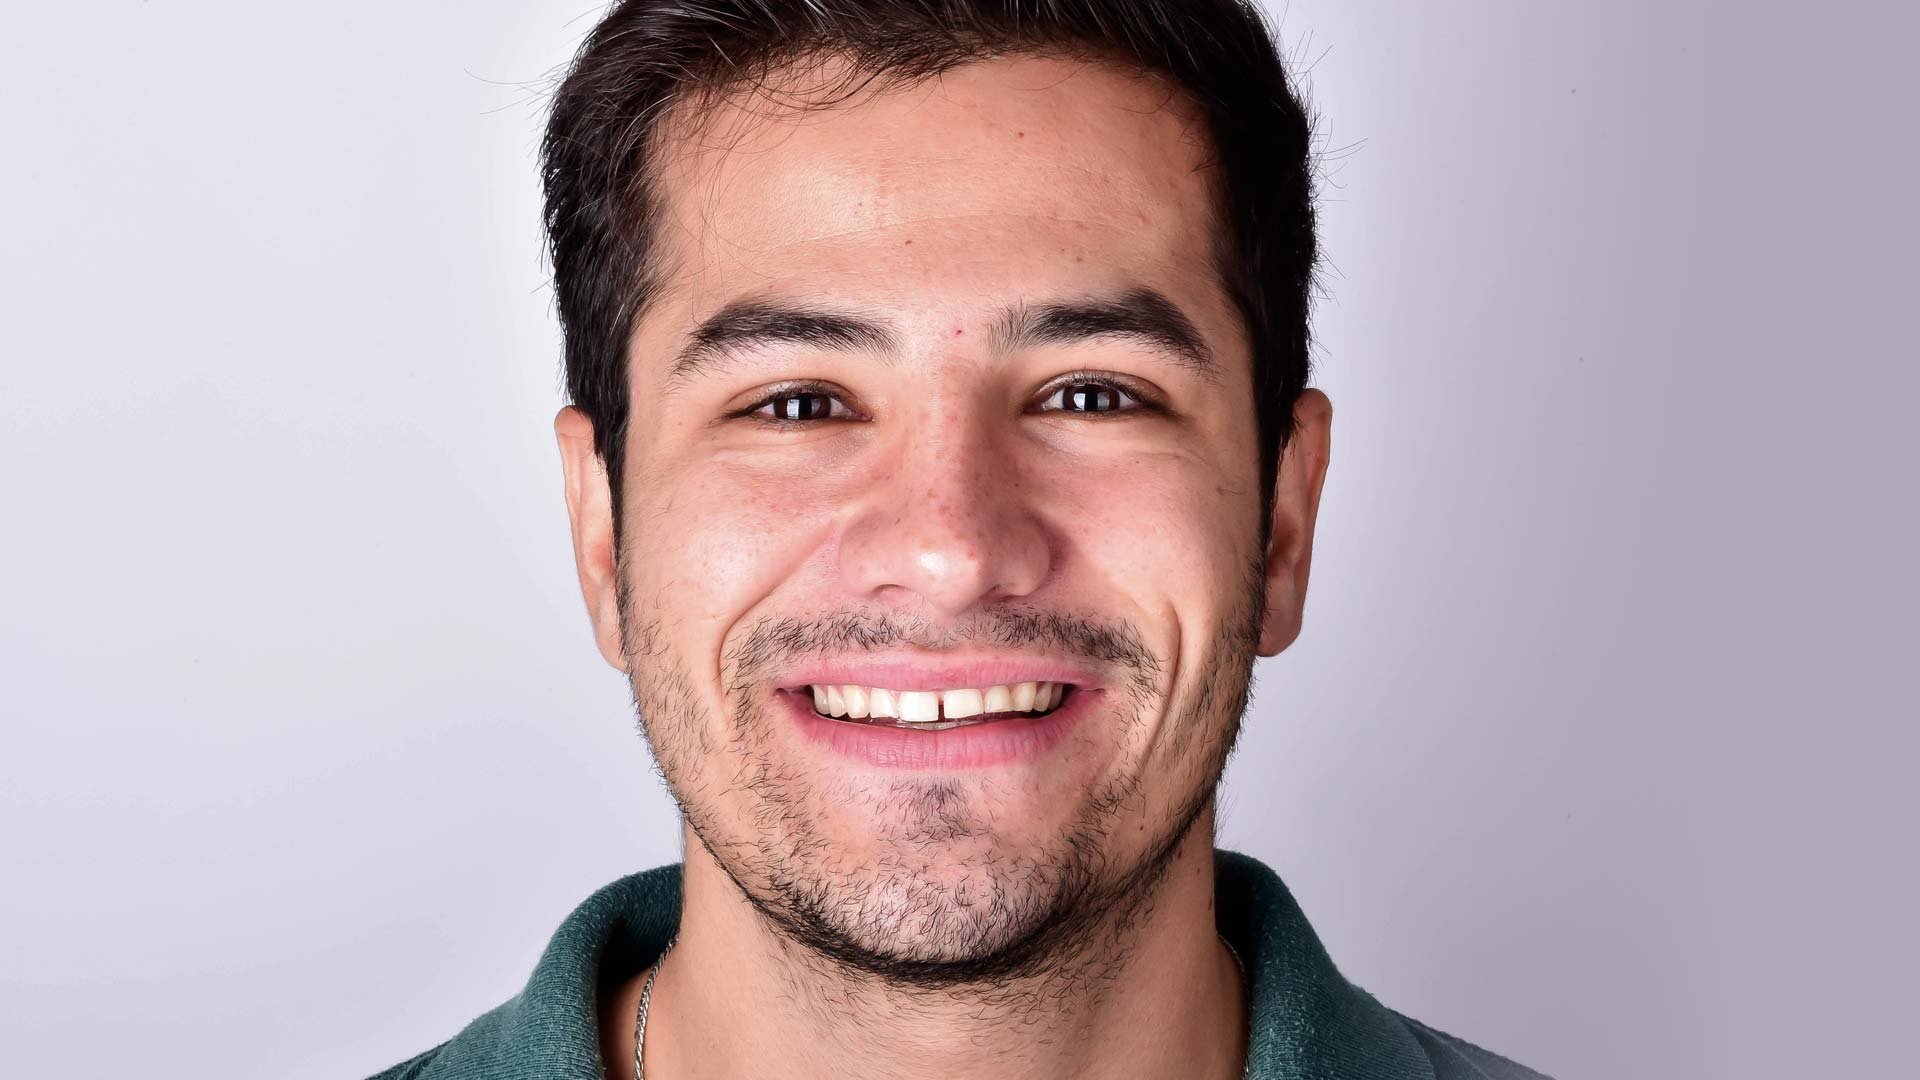 A young man smiling and showing his teeth before Digital Smile Design dental treatment